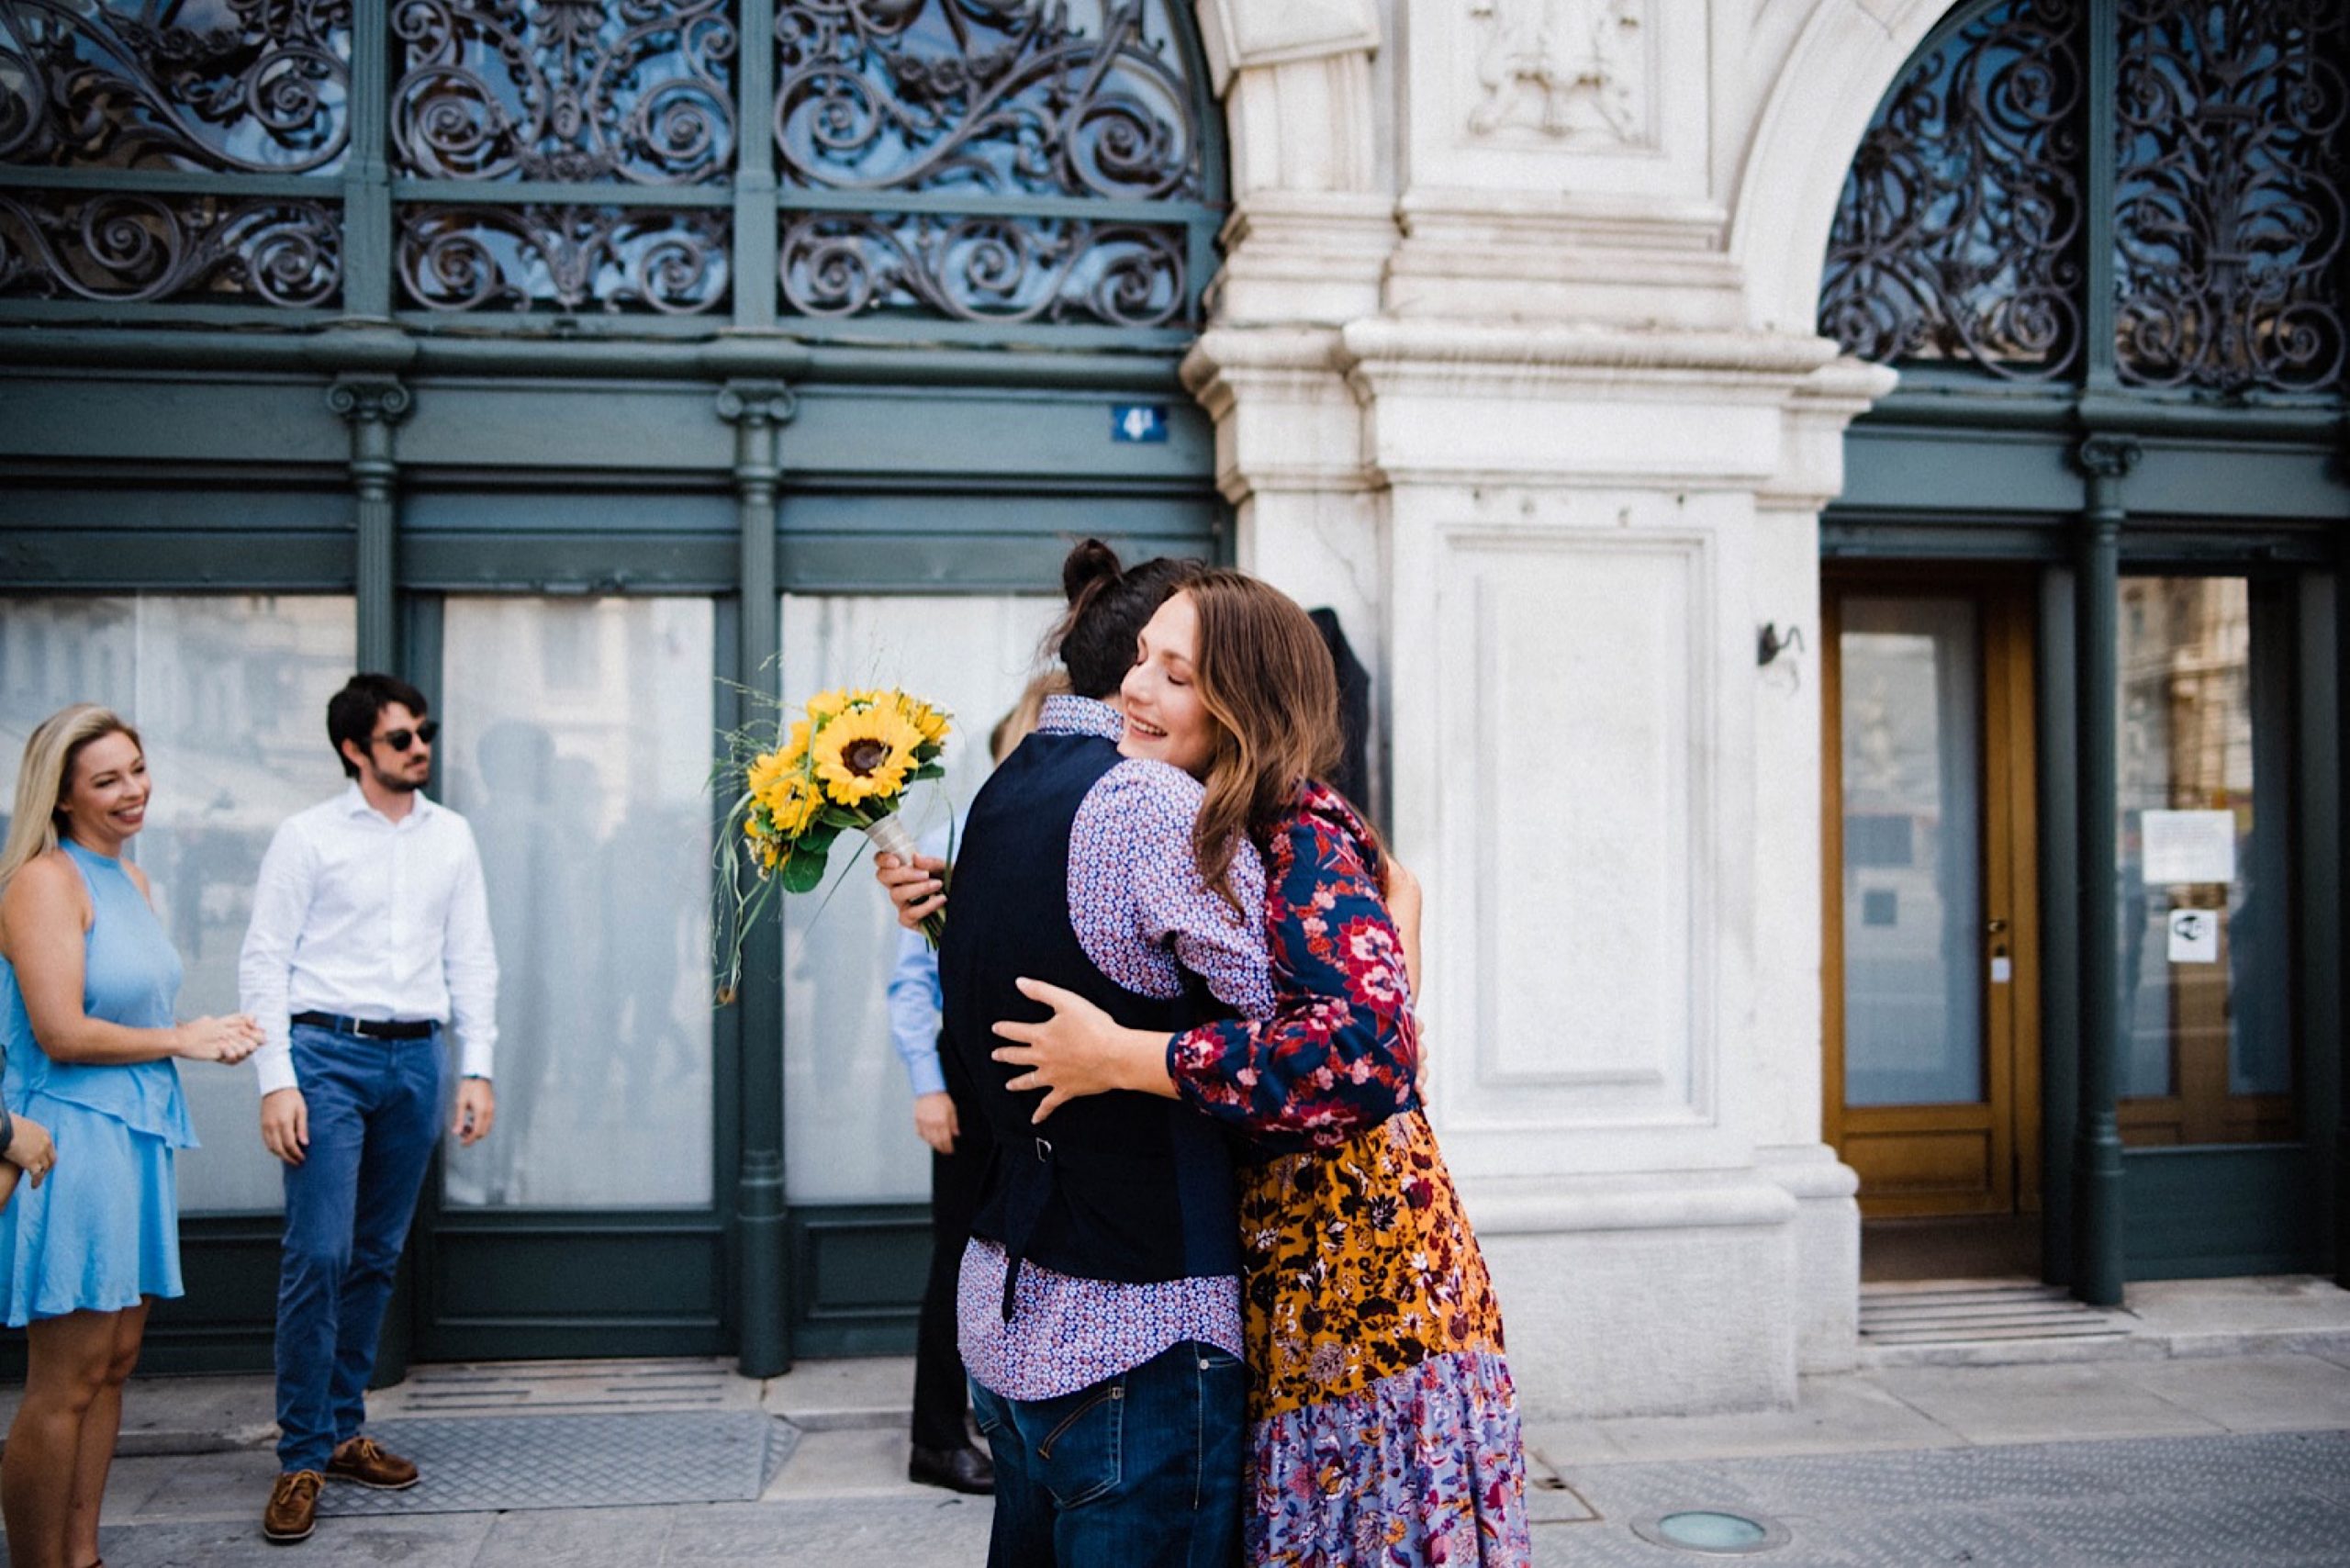 A wide photo of newlyweds hugging each other in the Piazza Unità in Trieste, after their wedding ceremony.